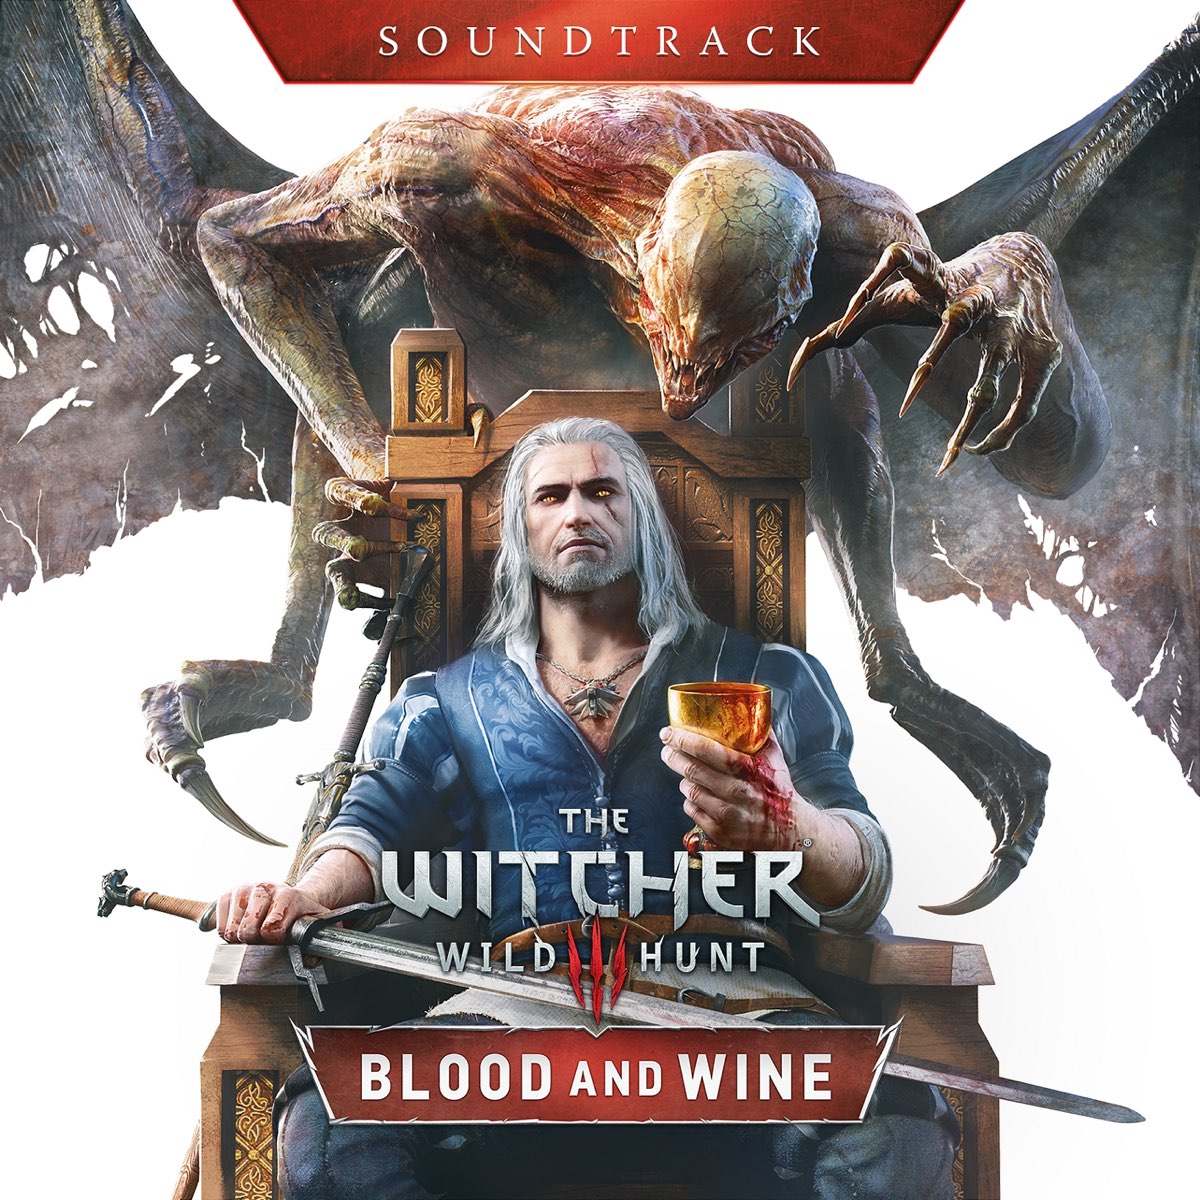 The witcher 3 blood and wine soundtrack